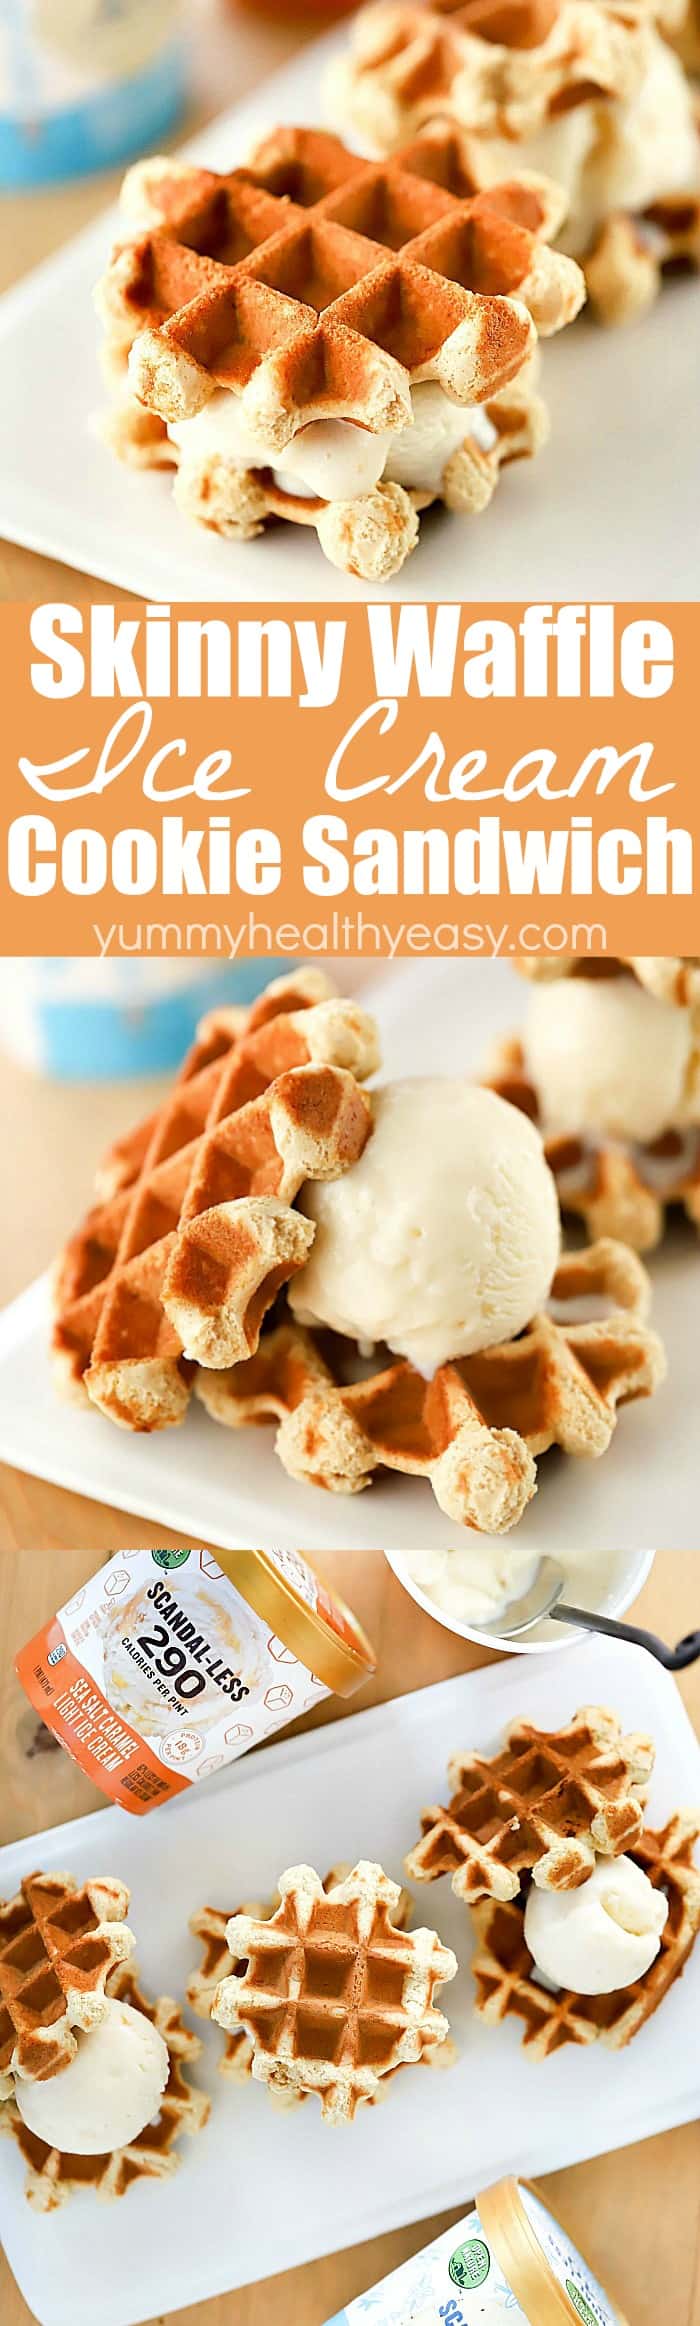 Ditch the store-bought ice cream sandwiches and make this homemade Skinny Waffle Ice Cream Sandwich recipe instead! This dessert recipe is a fun treat that's lower in calories, sugar & fat. The waffle cookies are made with lighter ingredients and uses Open Nature® Scandal-less Light Ice Cream for a healthier ice cream filling. Yum! 
#ad #icecream #dessert #healthy #waffles #wafflecookies #healthydessert #icecream #icecreamsandwich  via @jennikolaus